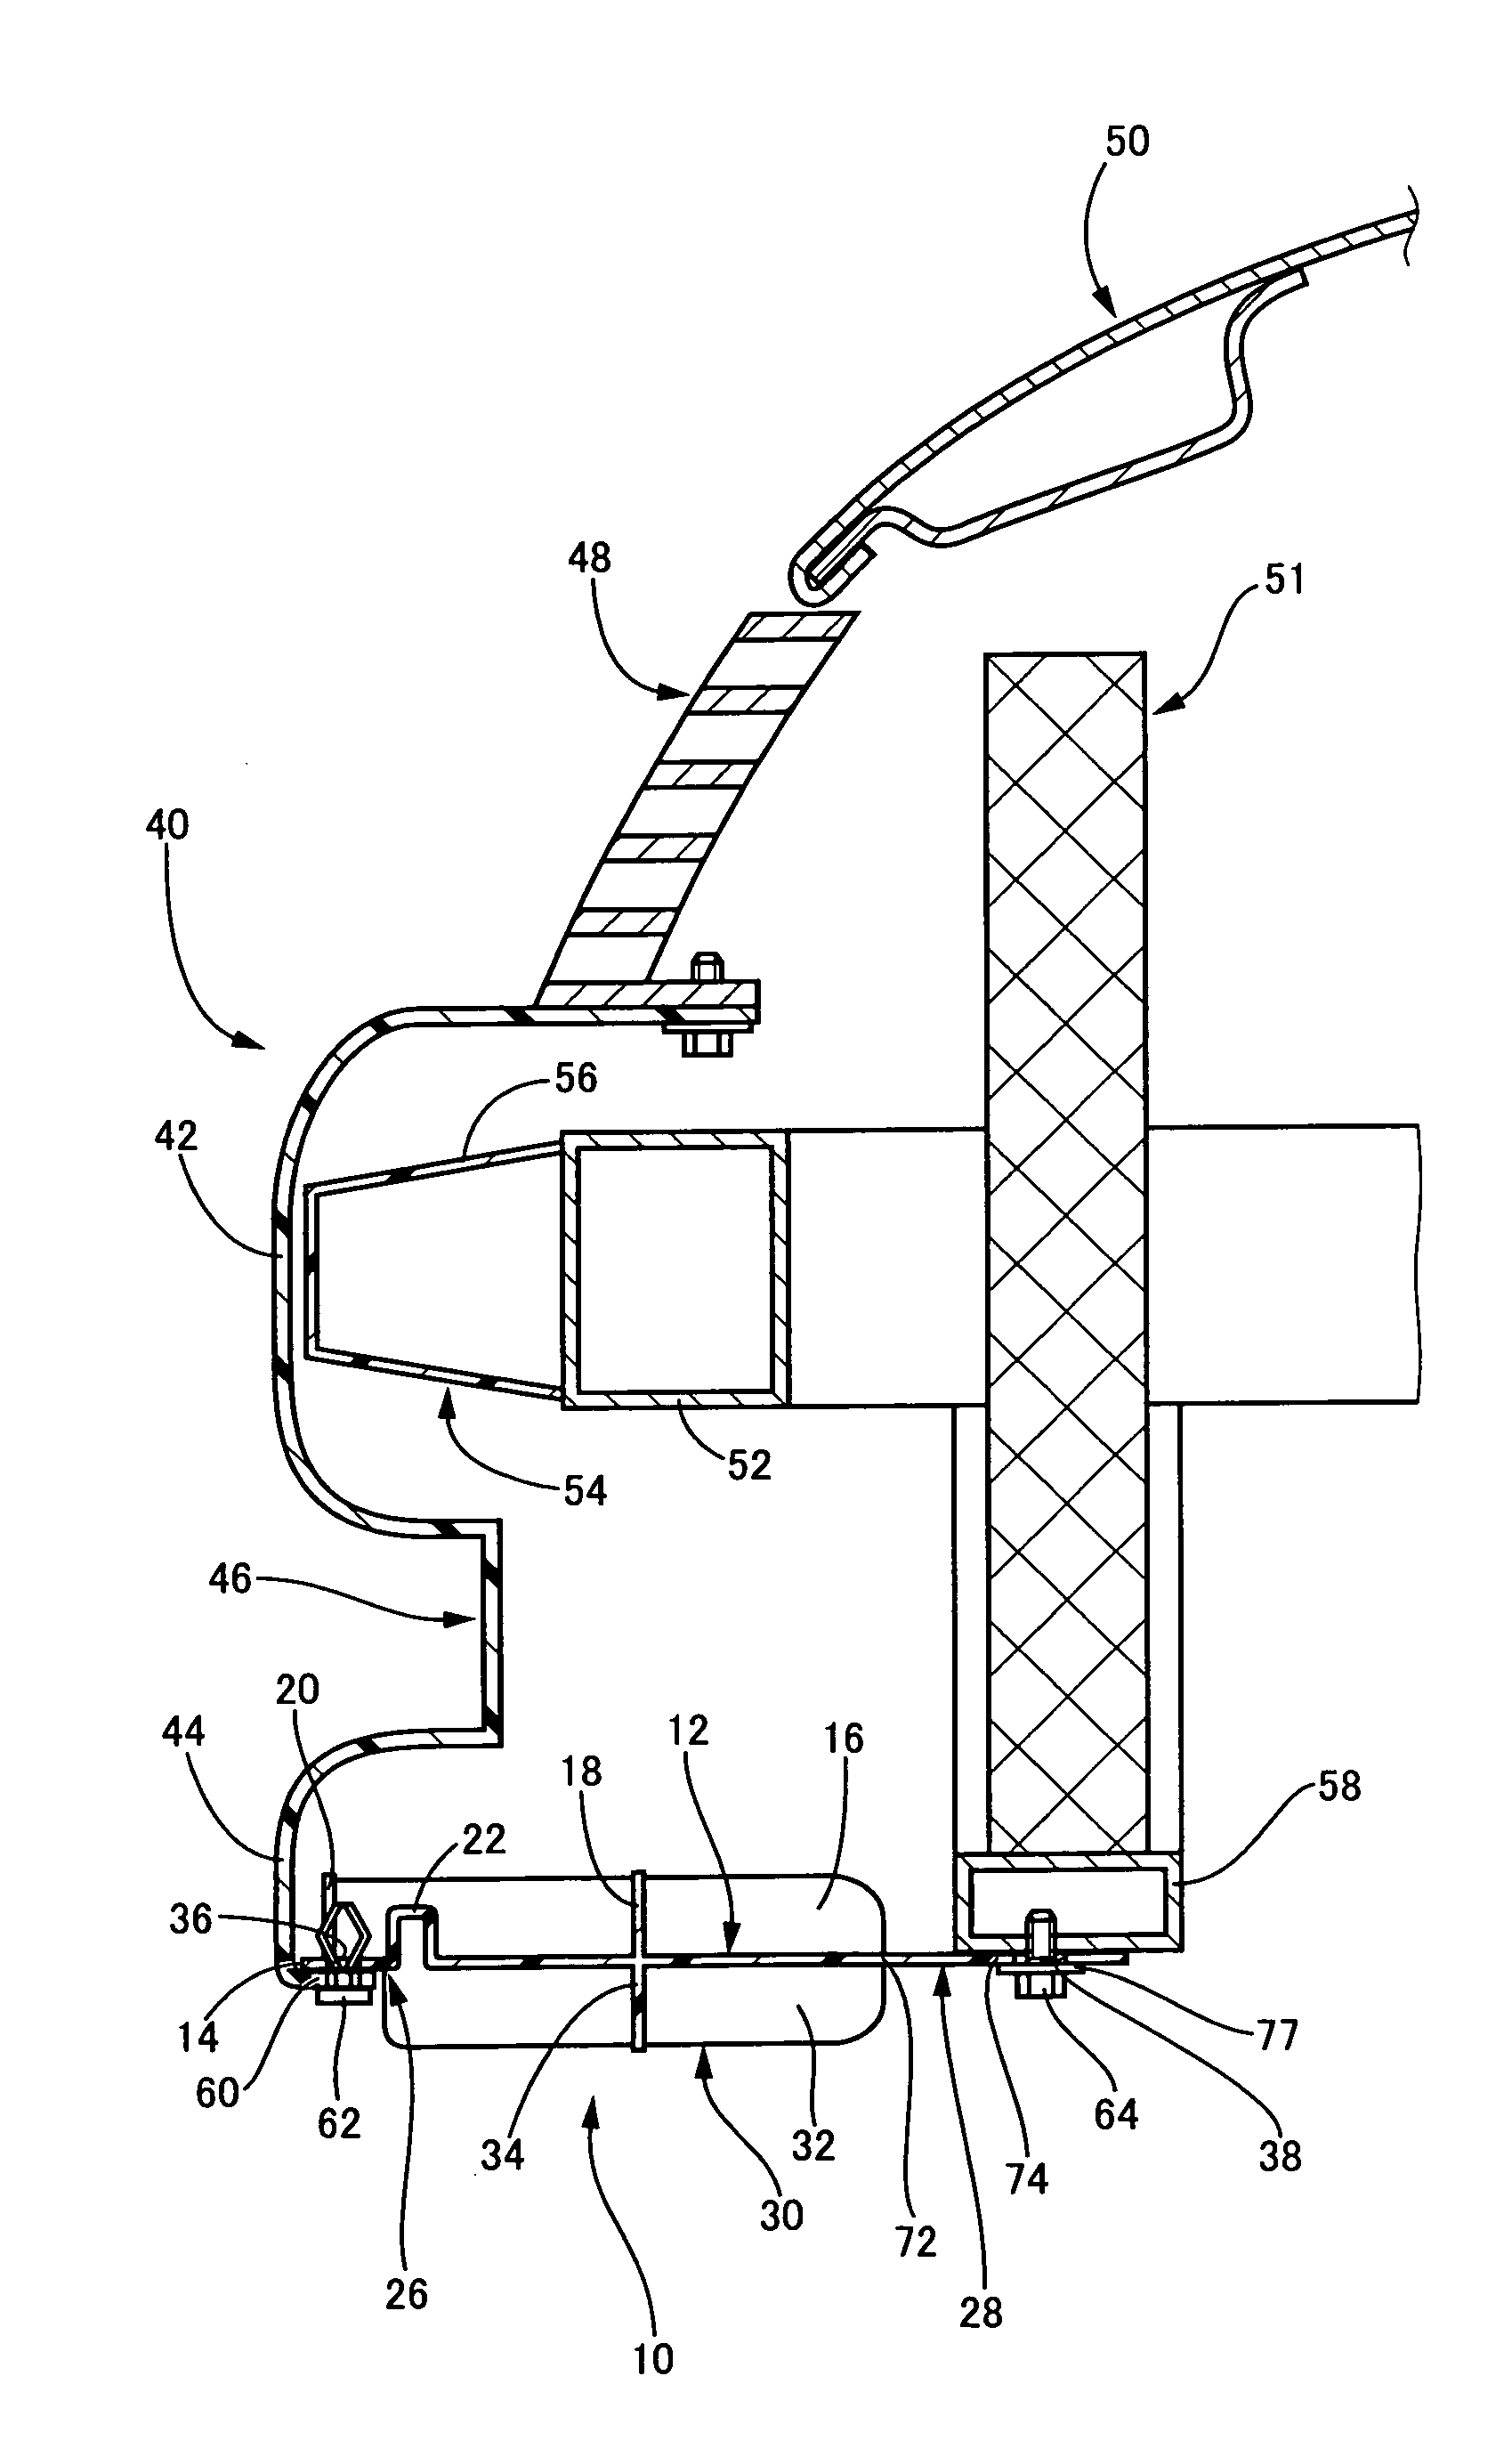 Pedestrian protection apparatus, and method of tuning load characteristic of the apparatus